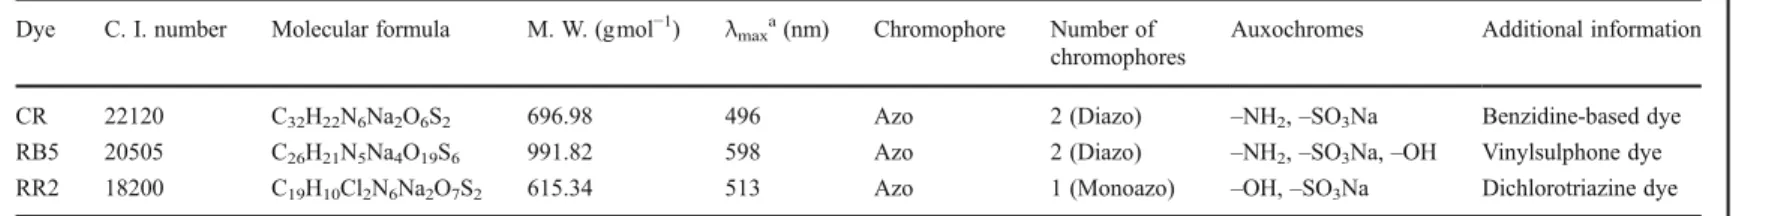 Table 1 General characteristics of the dyes used as model compounds